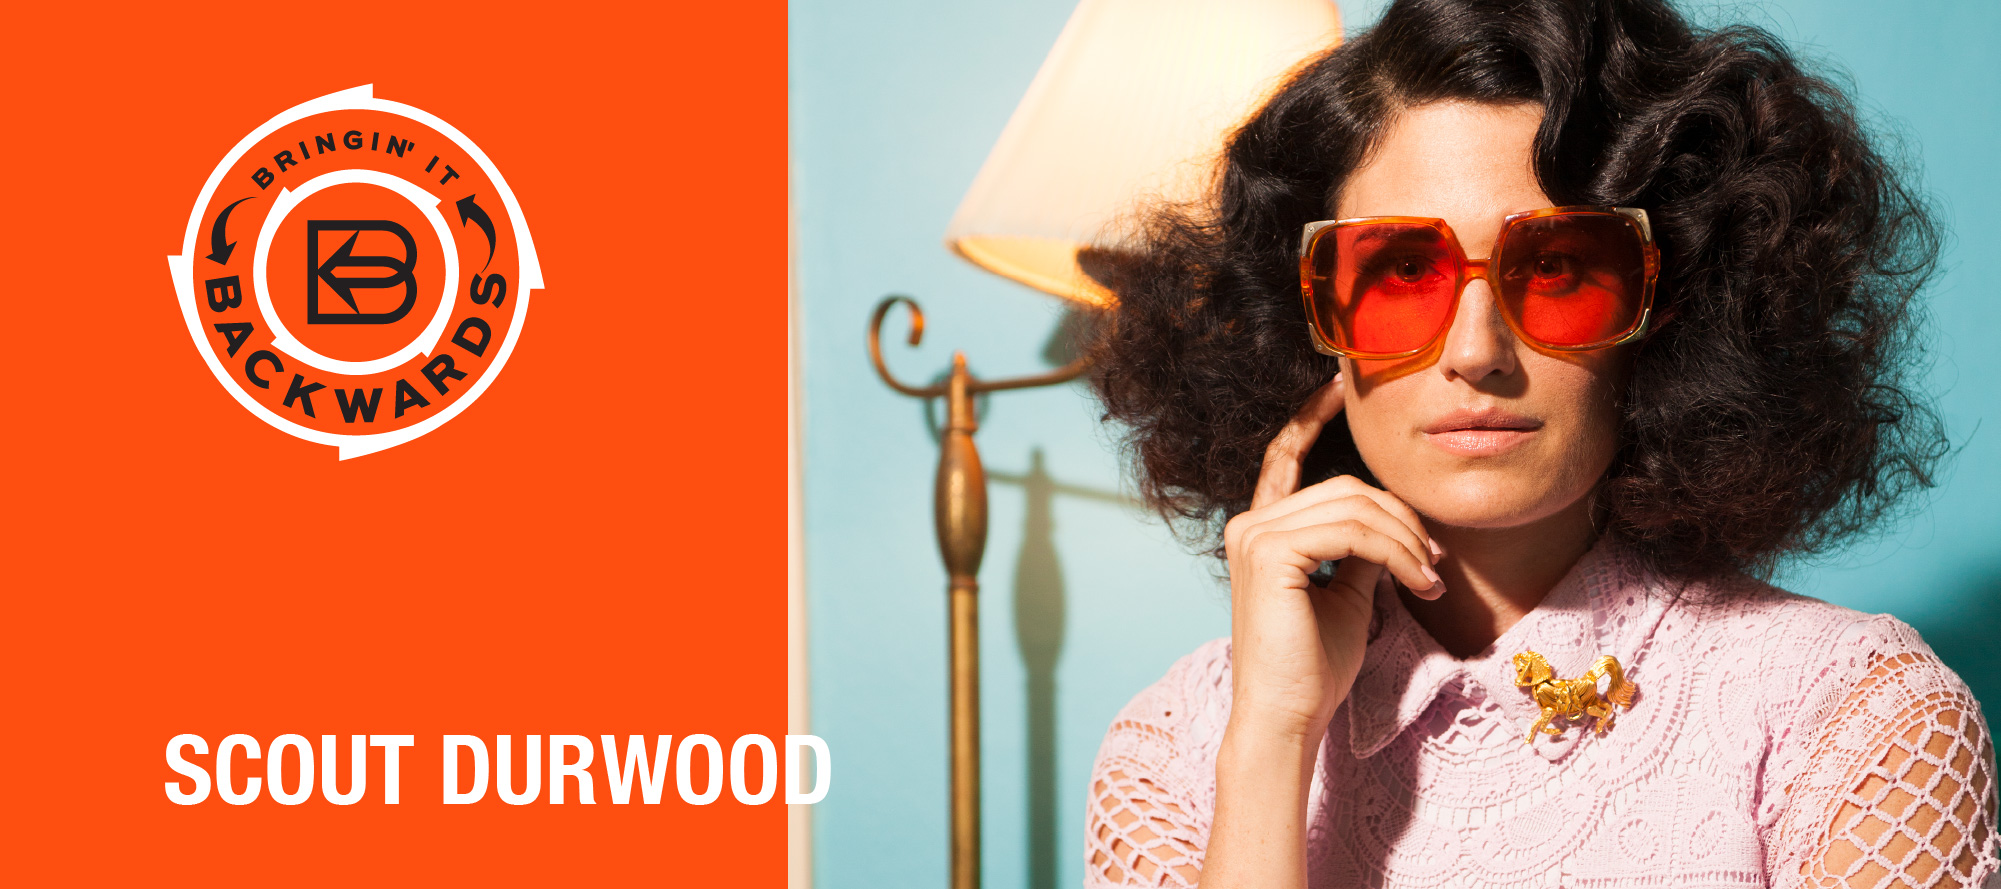 Bringin’ it Backwards: Interview with Scout Durwood